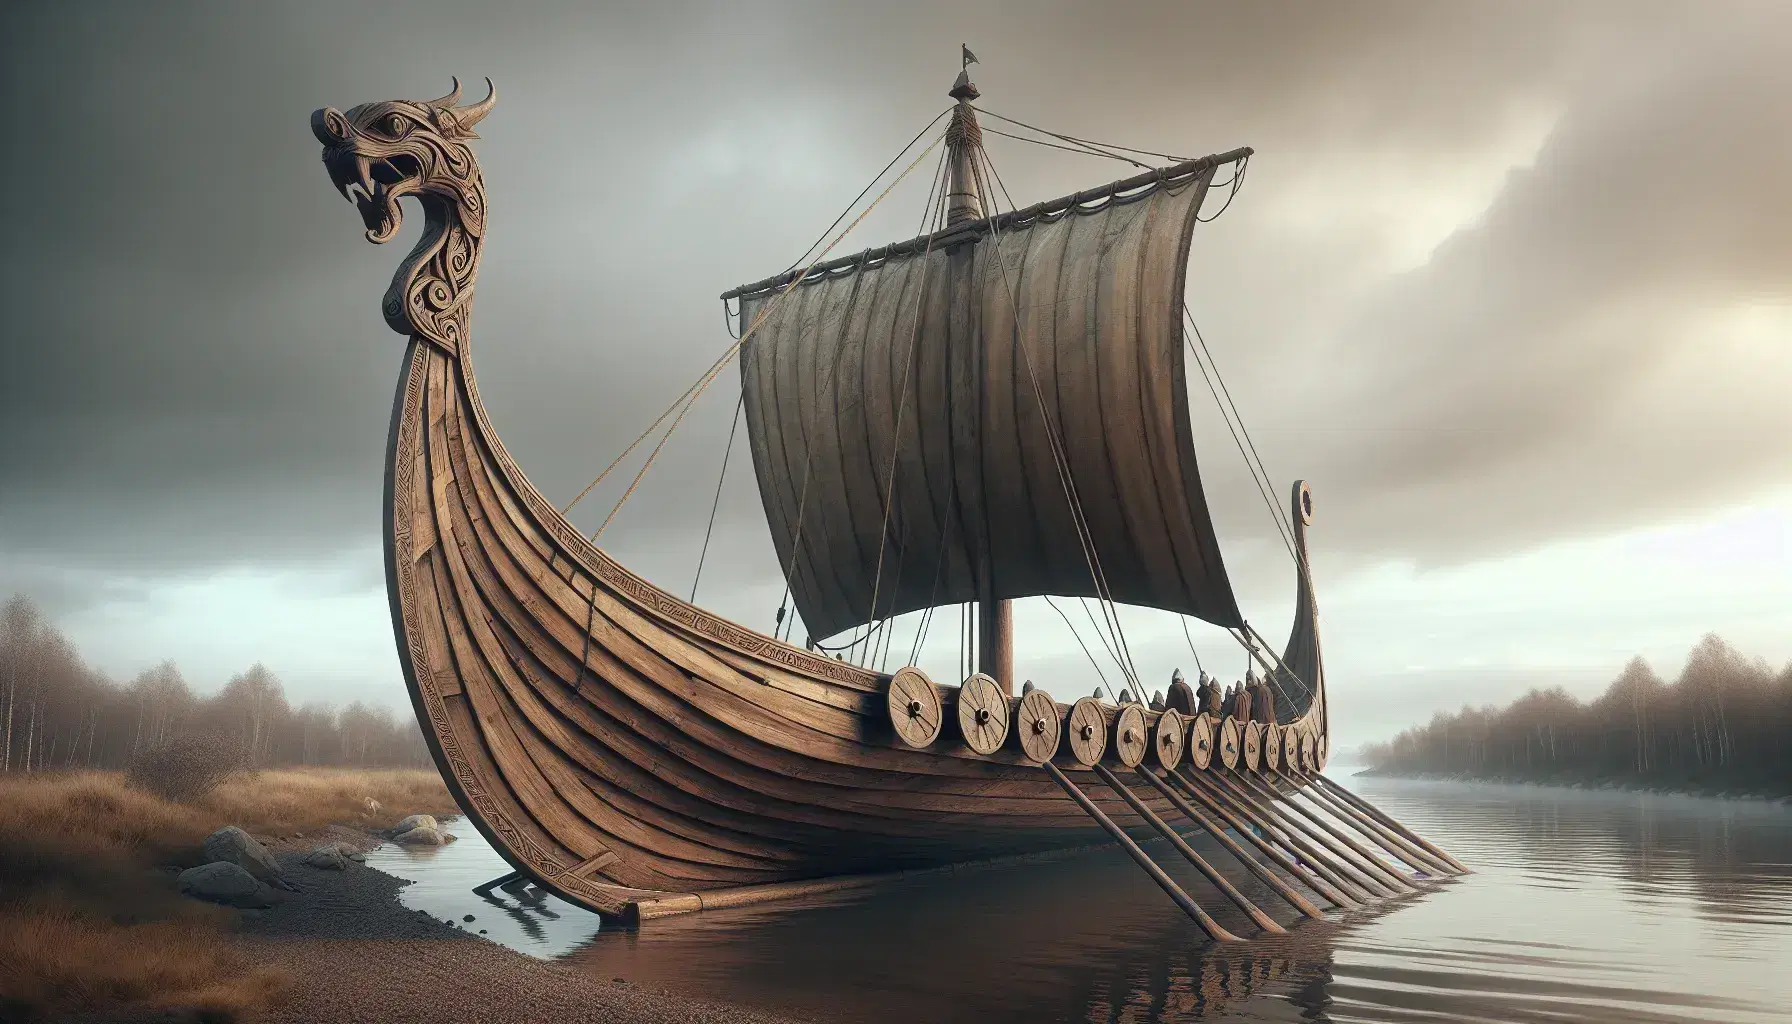 Reconstructed Viking longship moored on riverbank with carved dragon head prow, furled gray sail, and period-dressed figures by thatched-roof settlement.